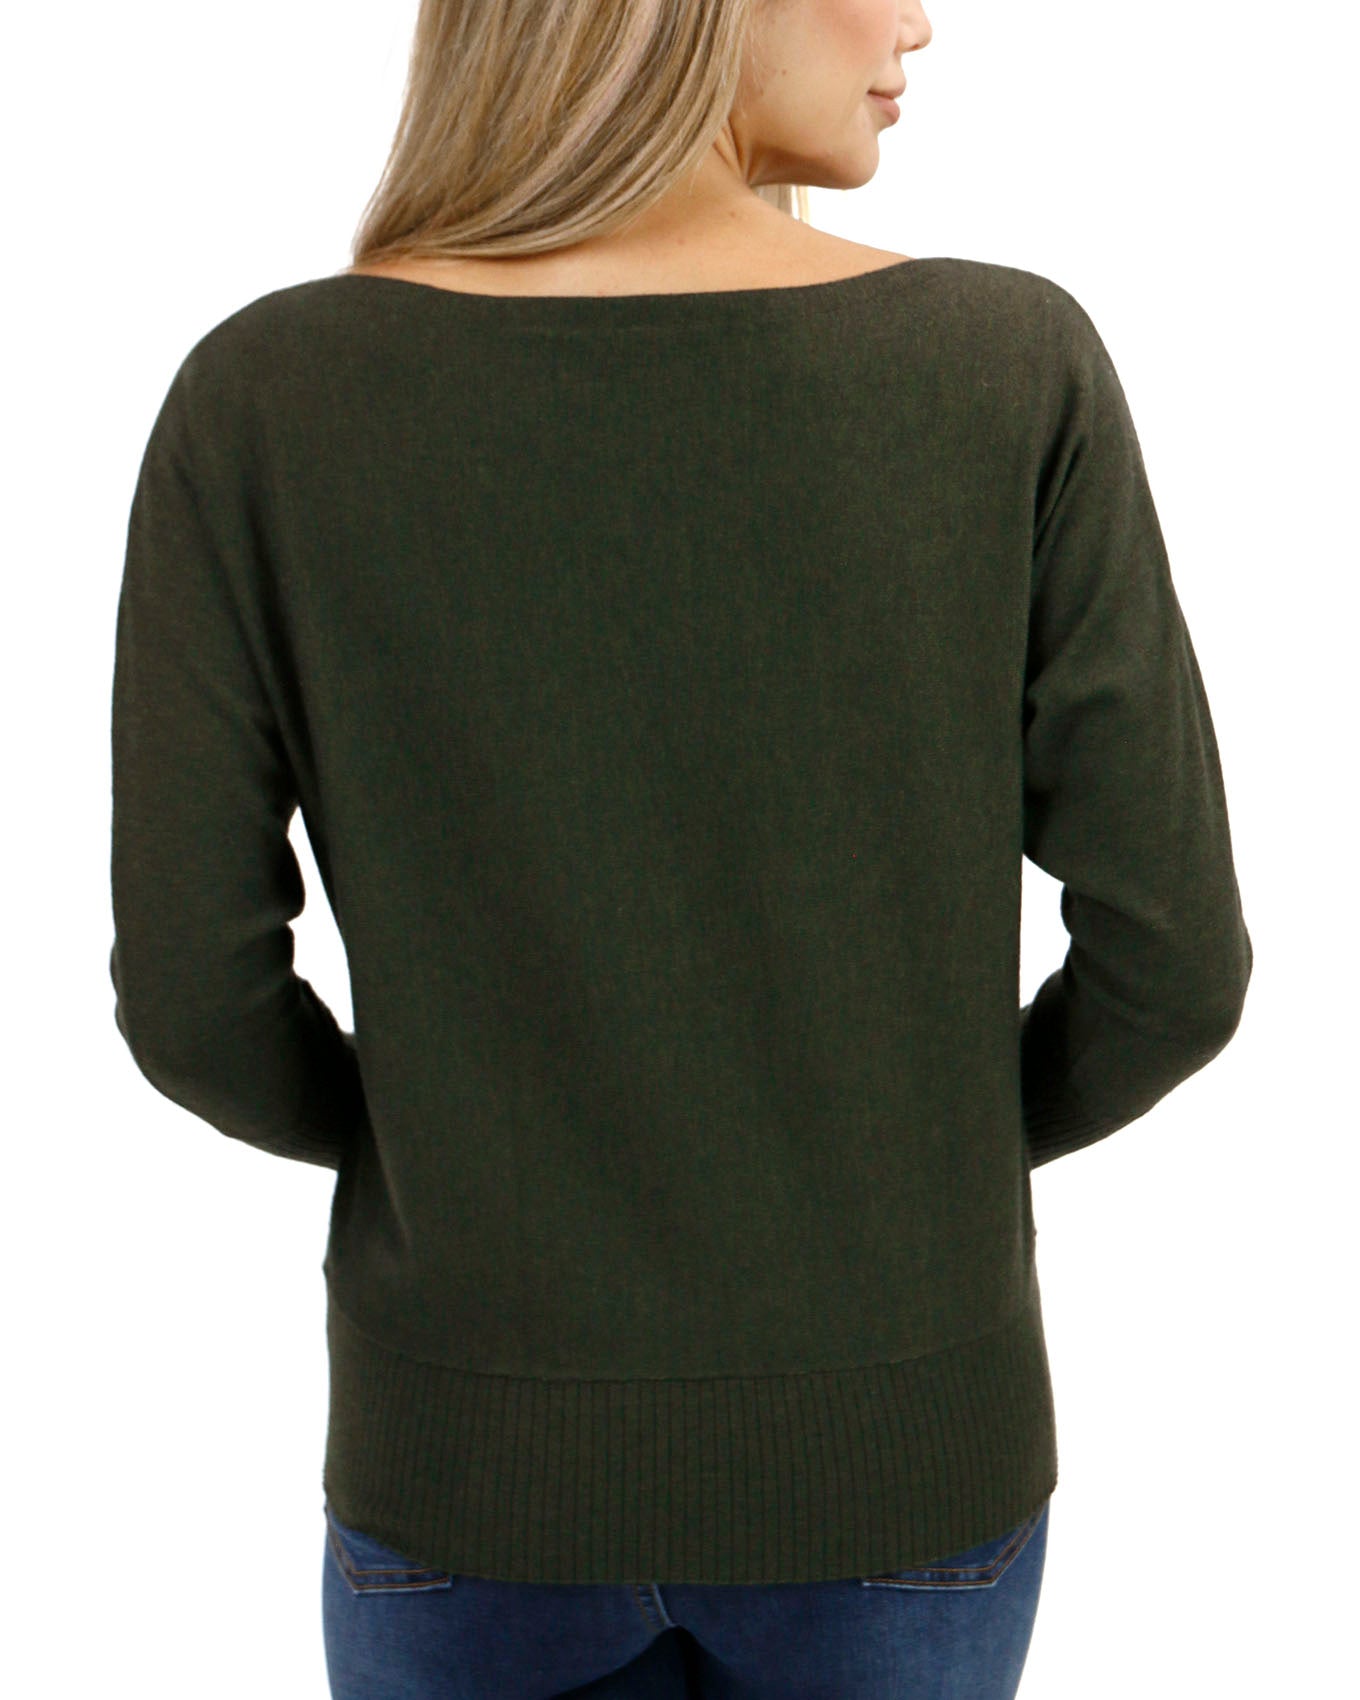 Back stock shot of Winter Moss Classic and Cozy Sweater Top